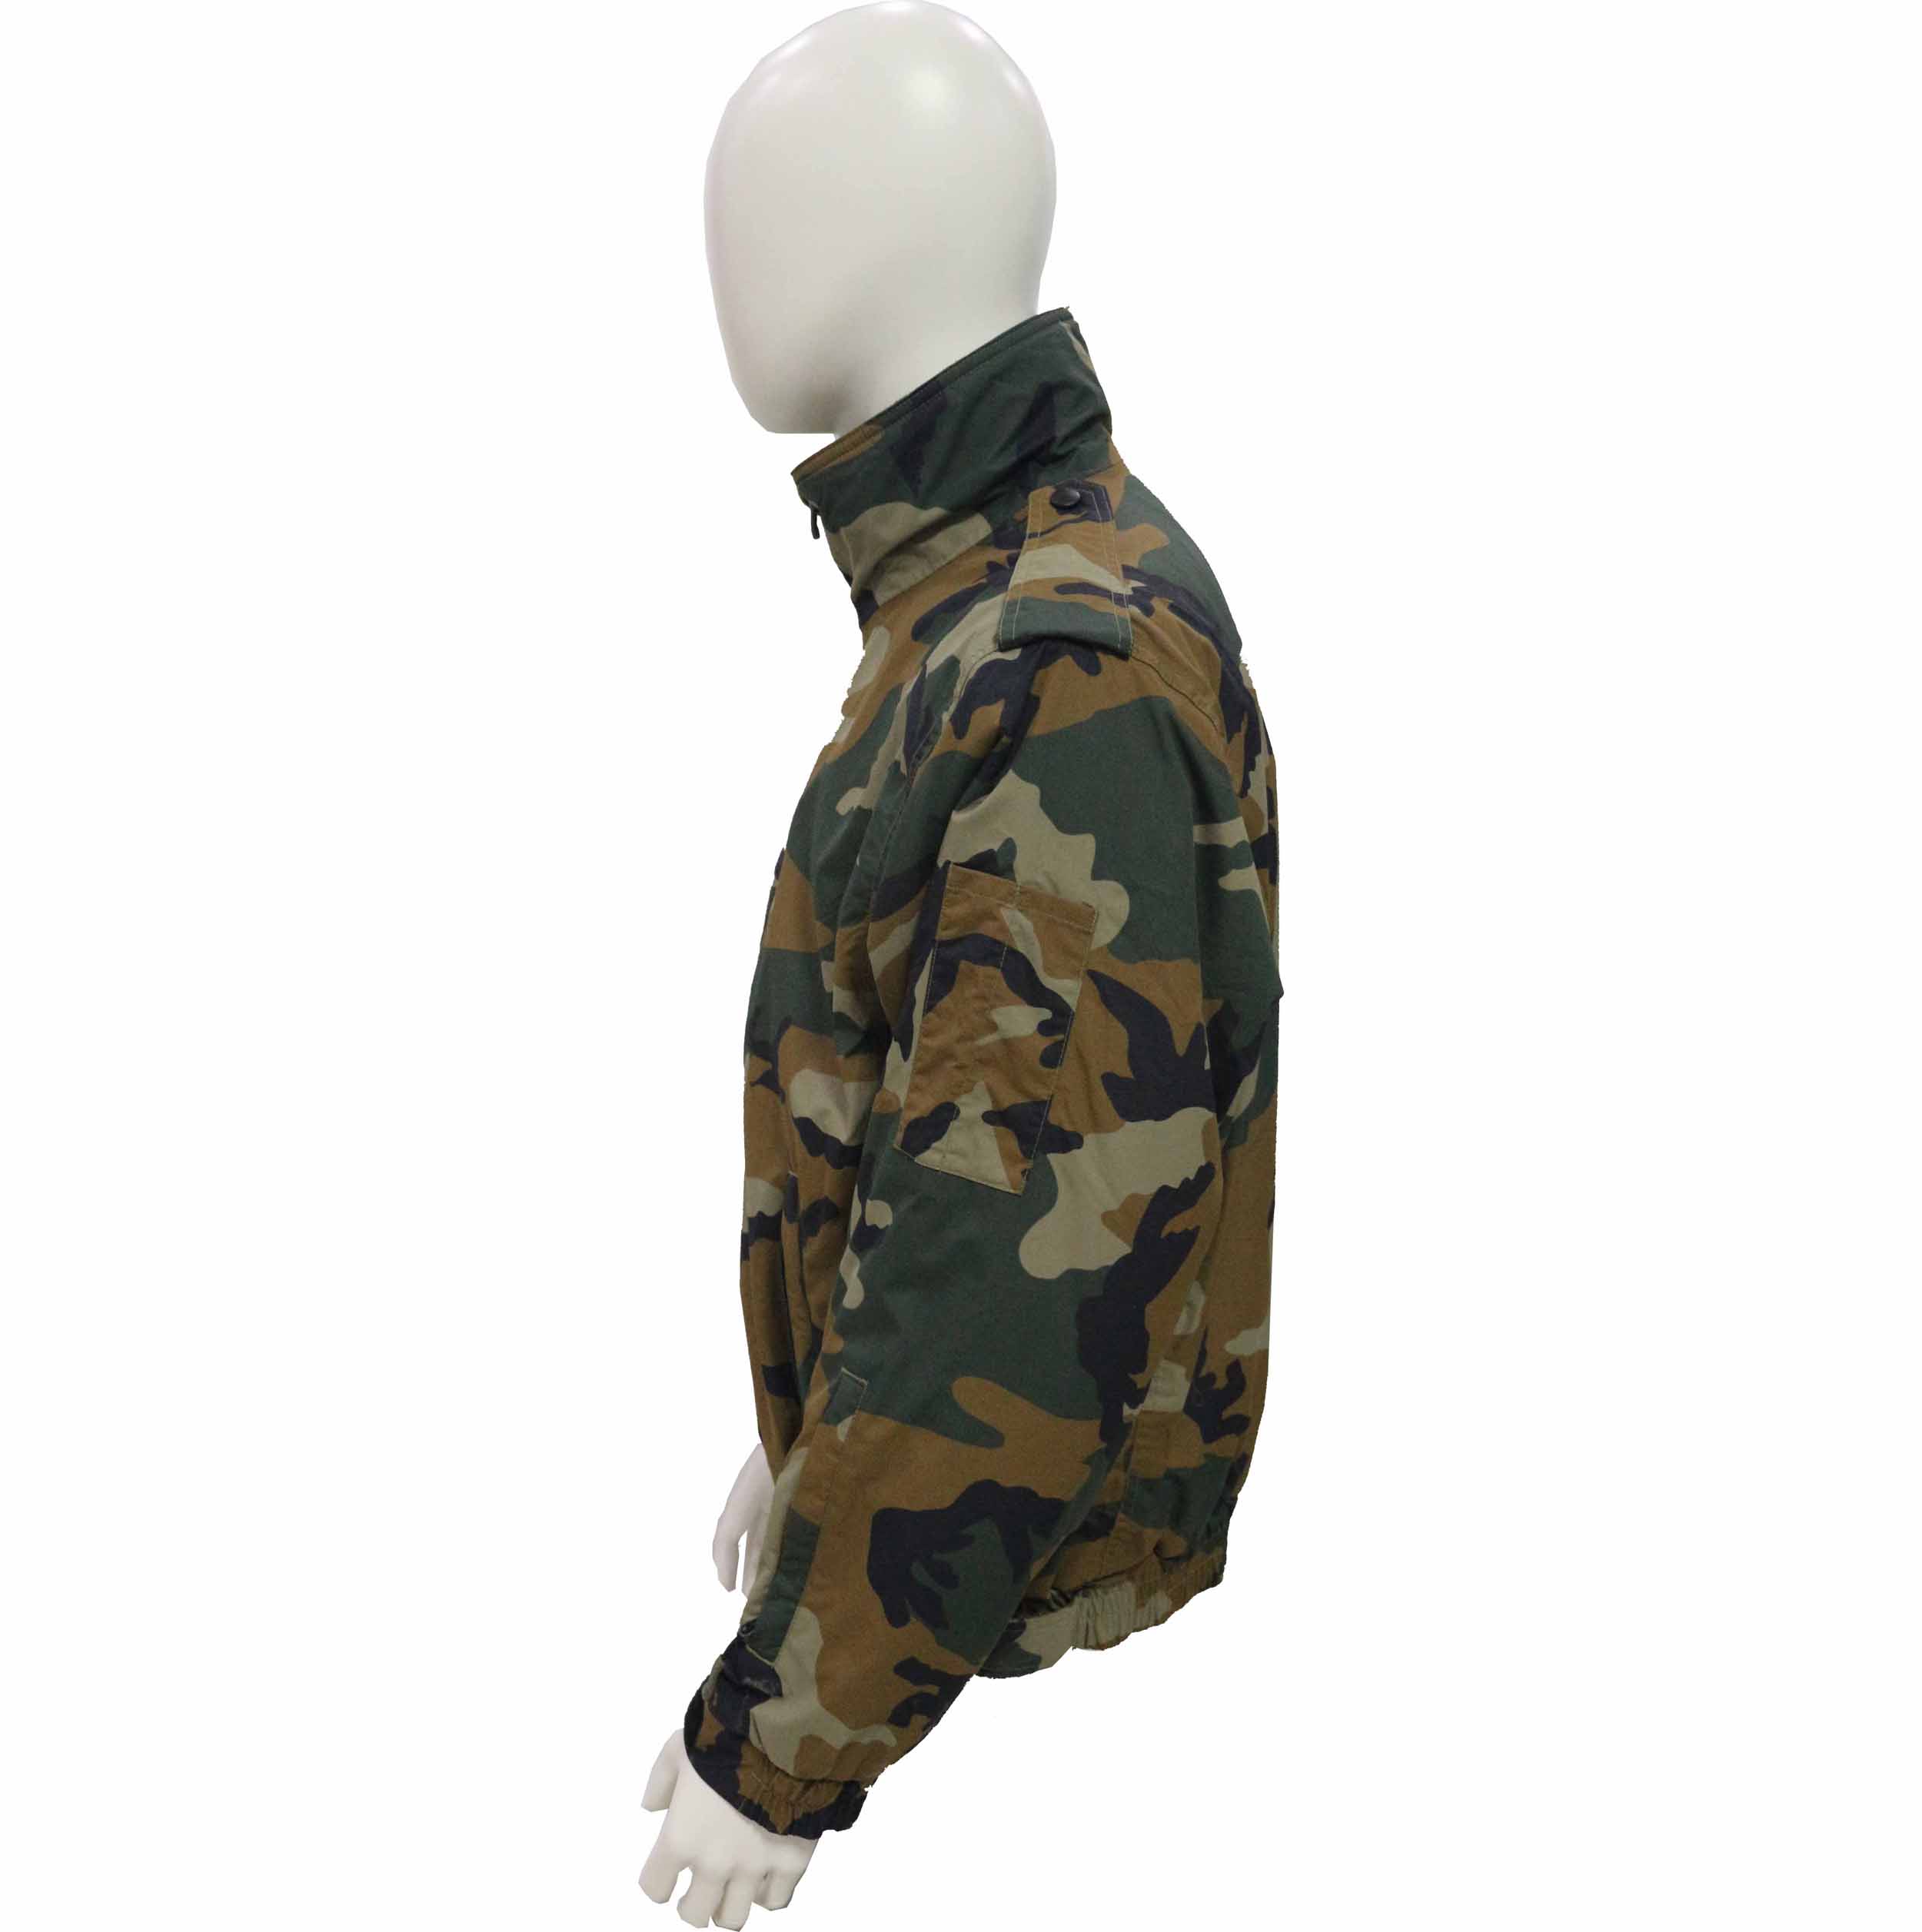 Military and Army Waterproof Jacket